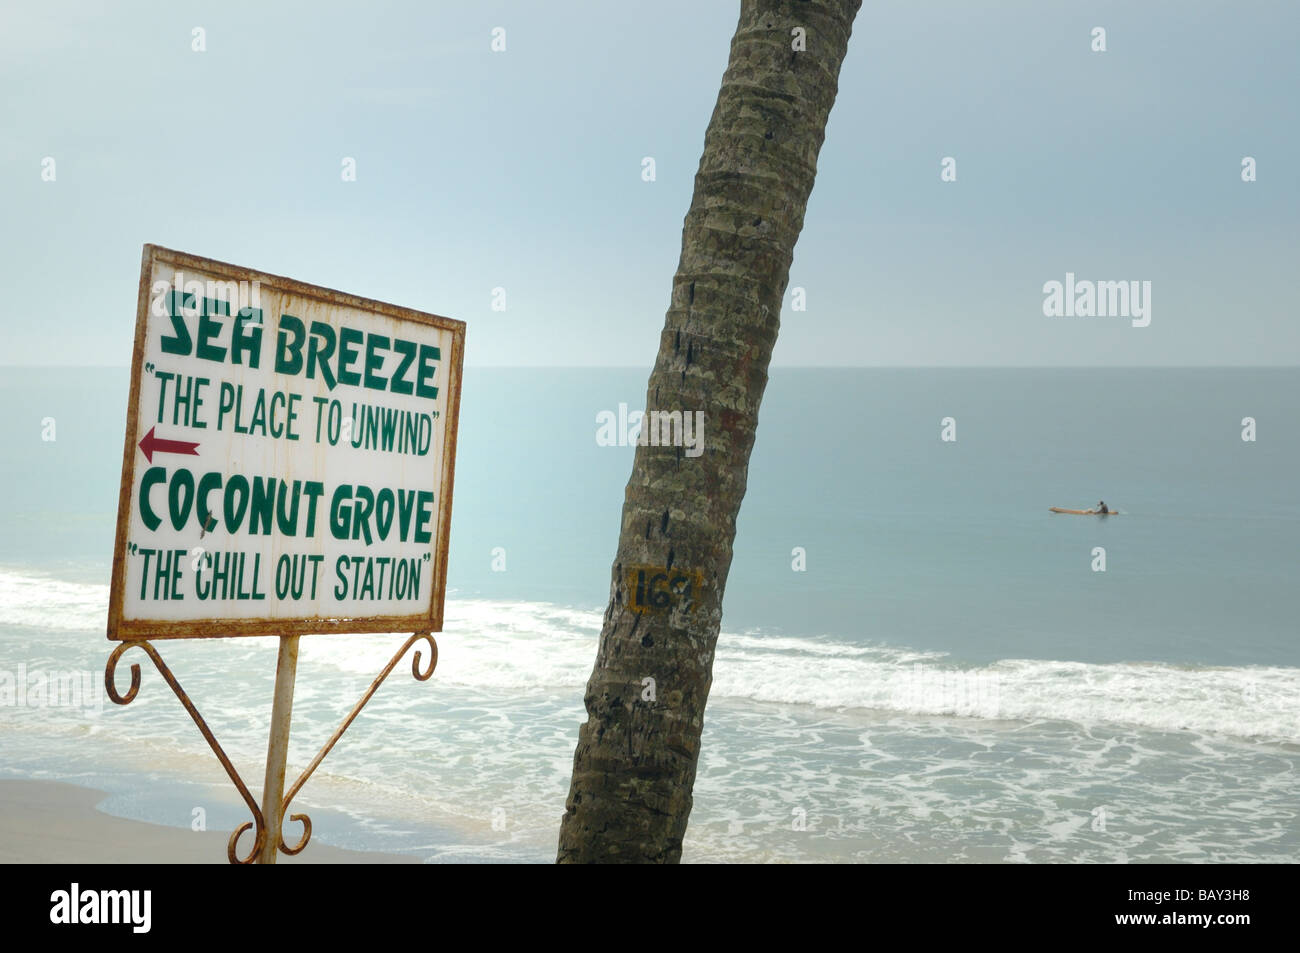 Sign against sea and sky promoting The Chill Out Station. Varkala beach, Kerala, India.  No releases available. Stock Photo